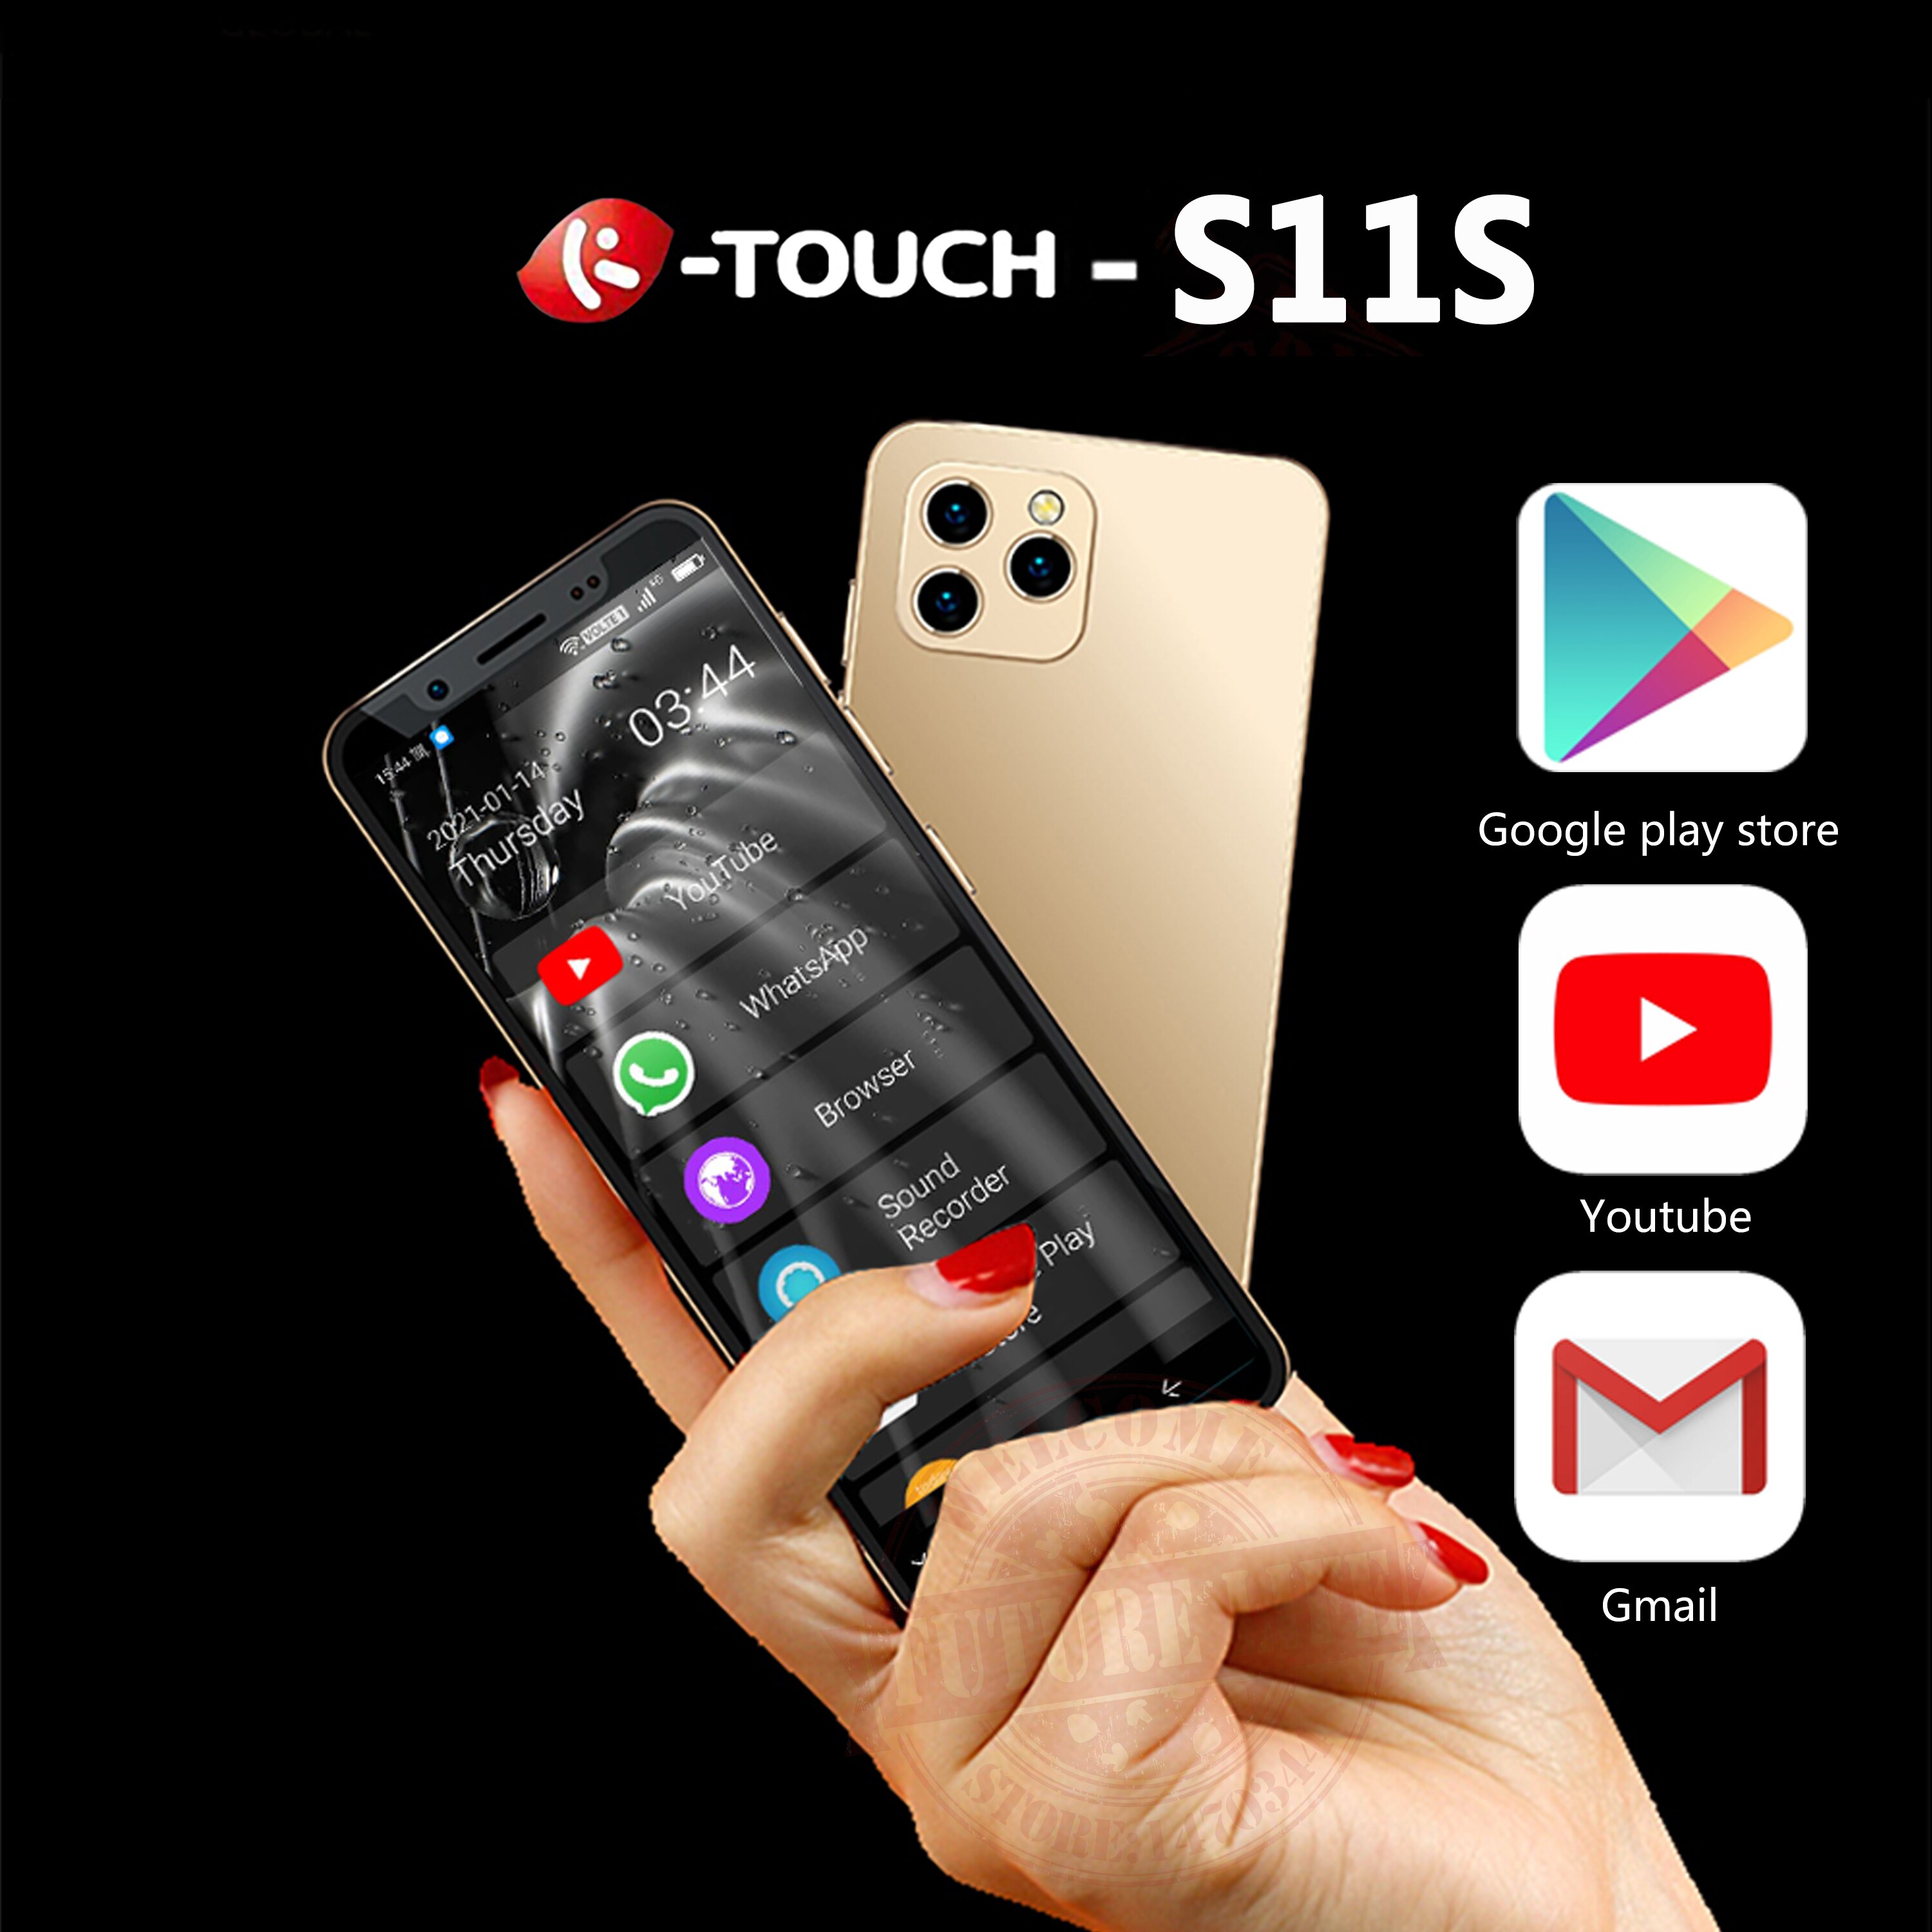 2021 Anica K-TOUCH S11S Google Play  3G + 32G..